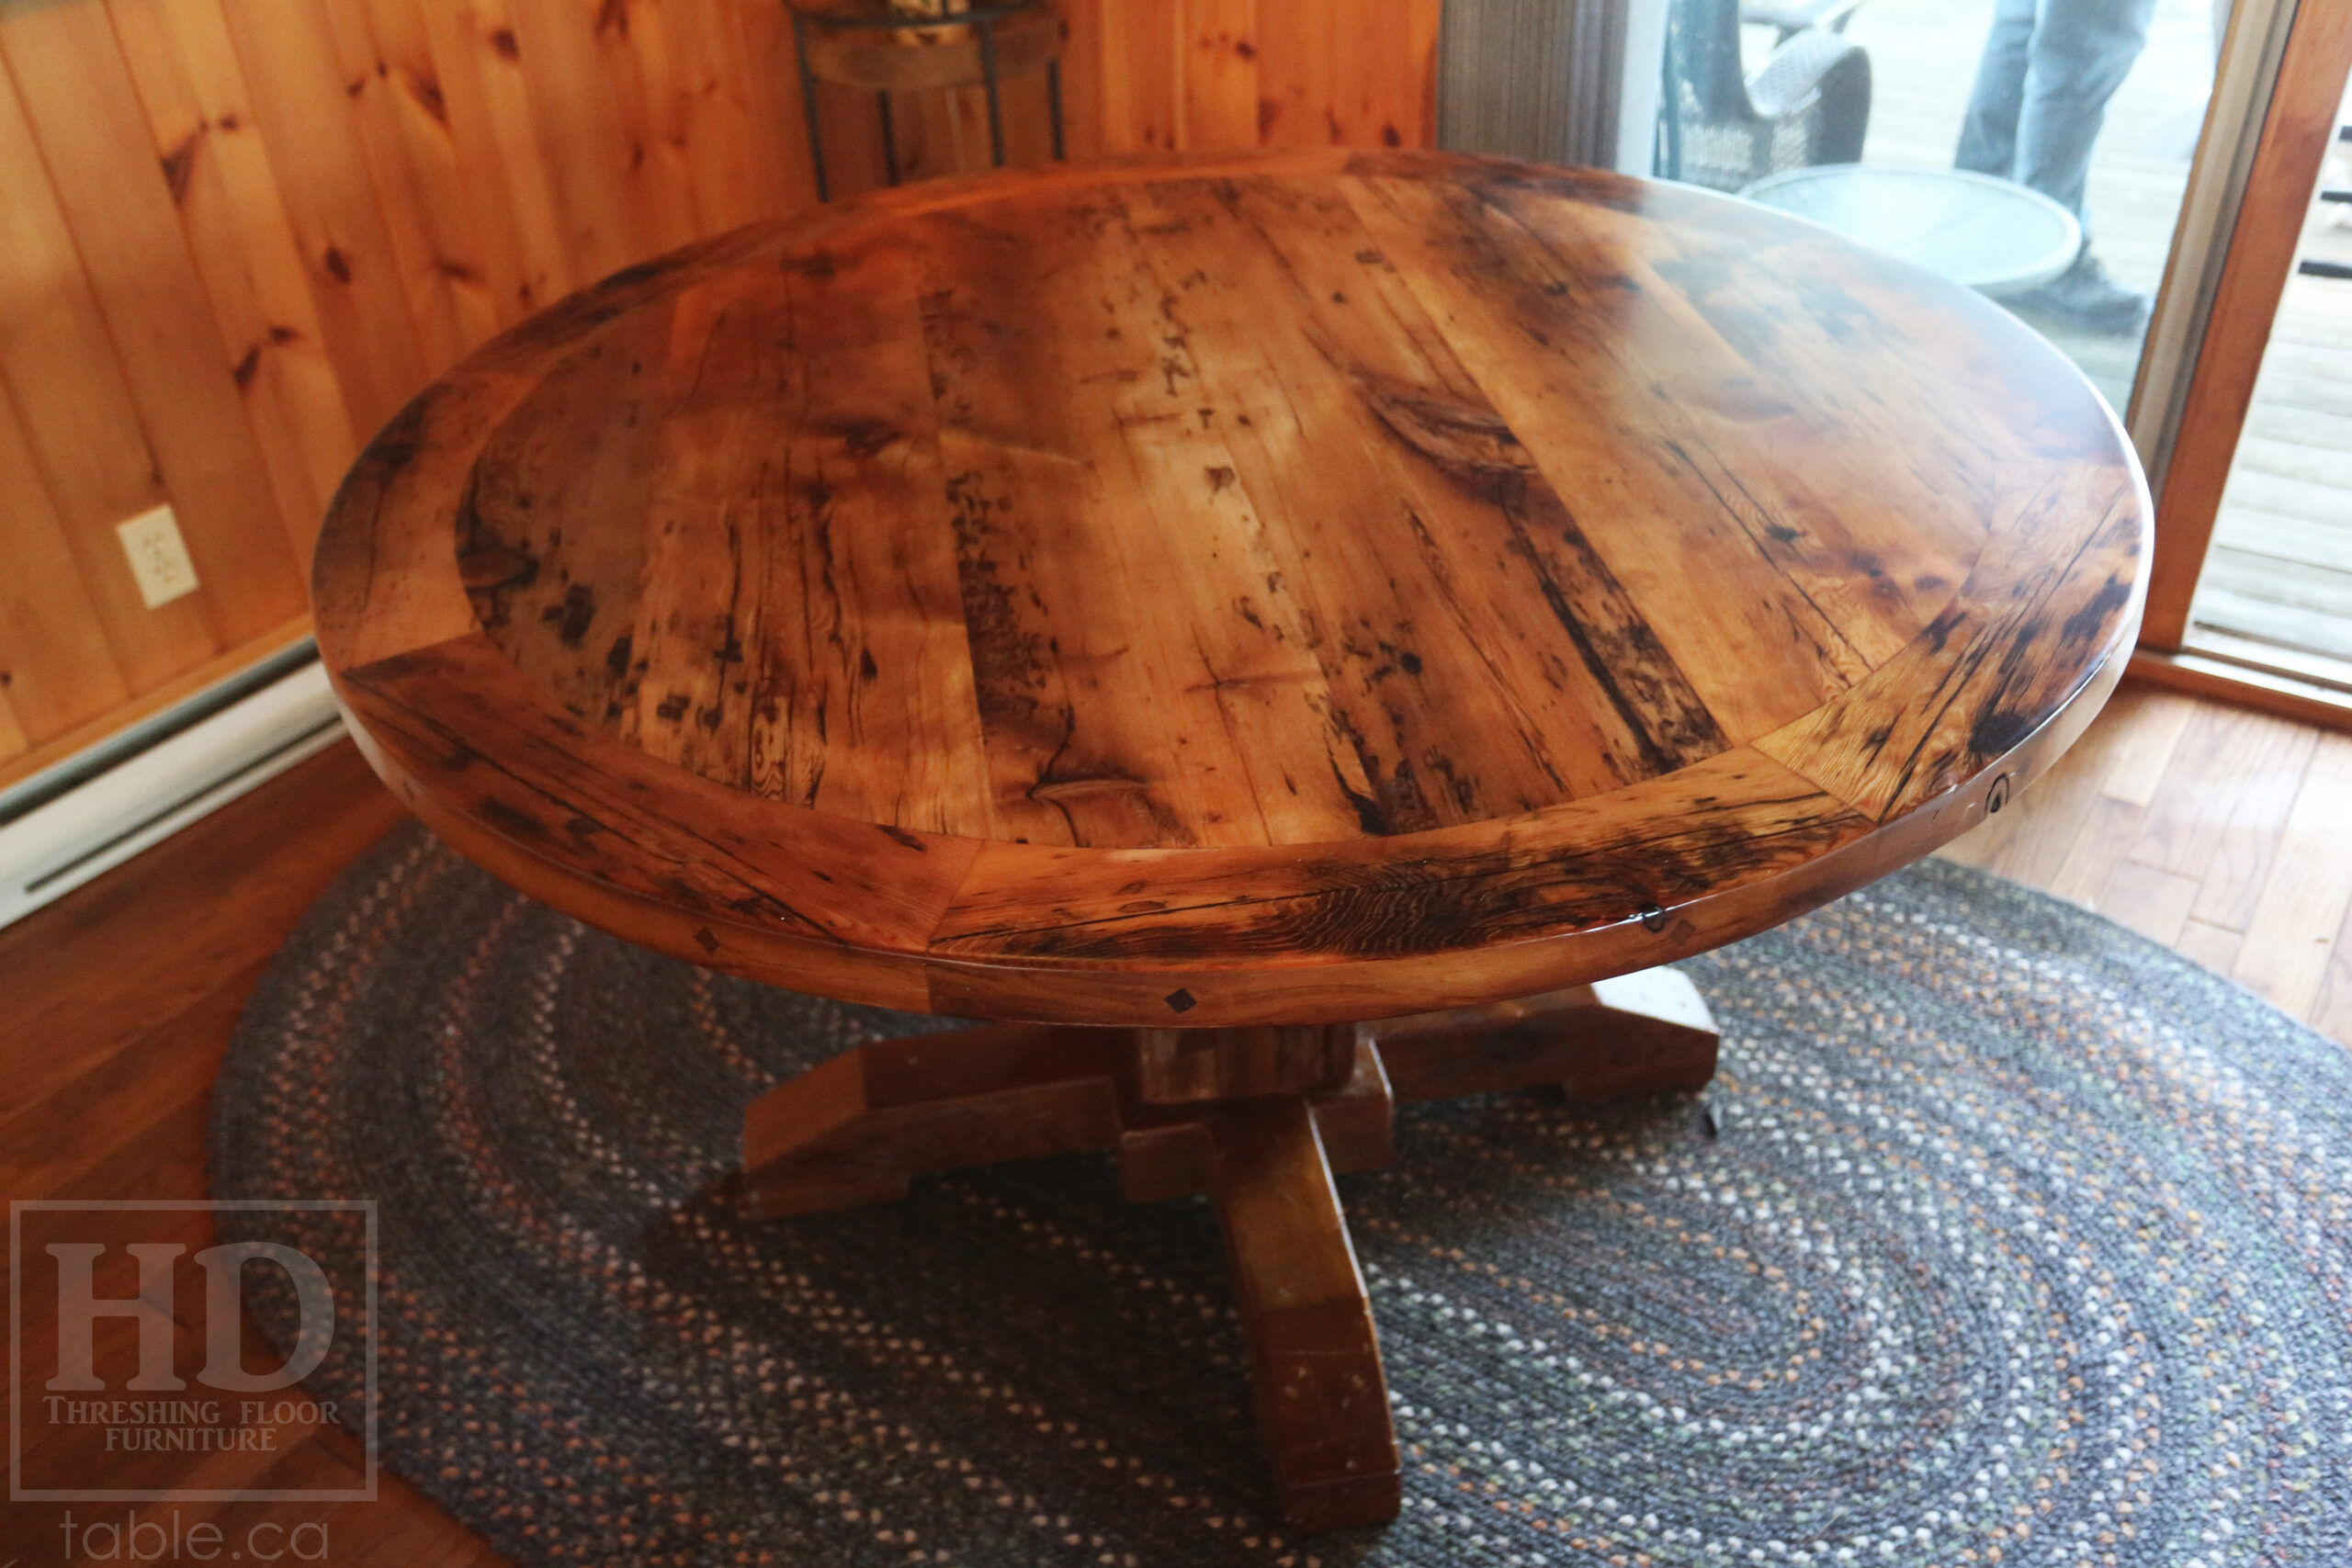 54” Reclaimed Ontario Barnwood Round Table we made for a Stoney Lake, Ontario cottage - Old Growth Hemlock Threshing Floor Construction – Hand-Hewn Beam Pedestal Base - Original edges & distressing maintained – Circular Bread Edge Boards – Premium epoxy + satin polyurethane finish – 18” Round Lazy Susan - www.table.ca